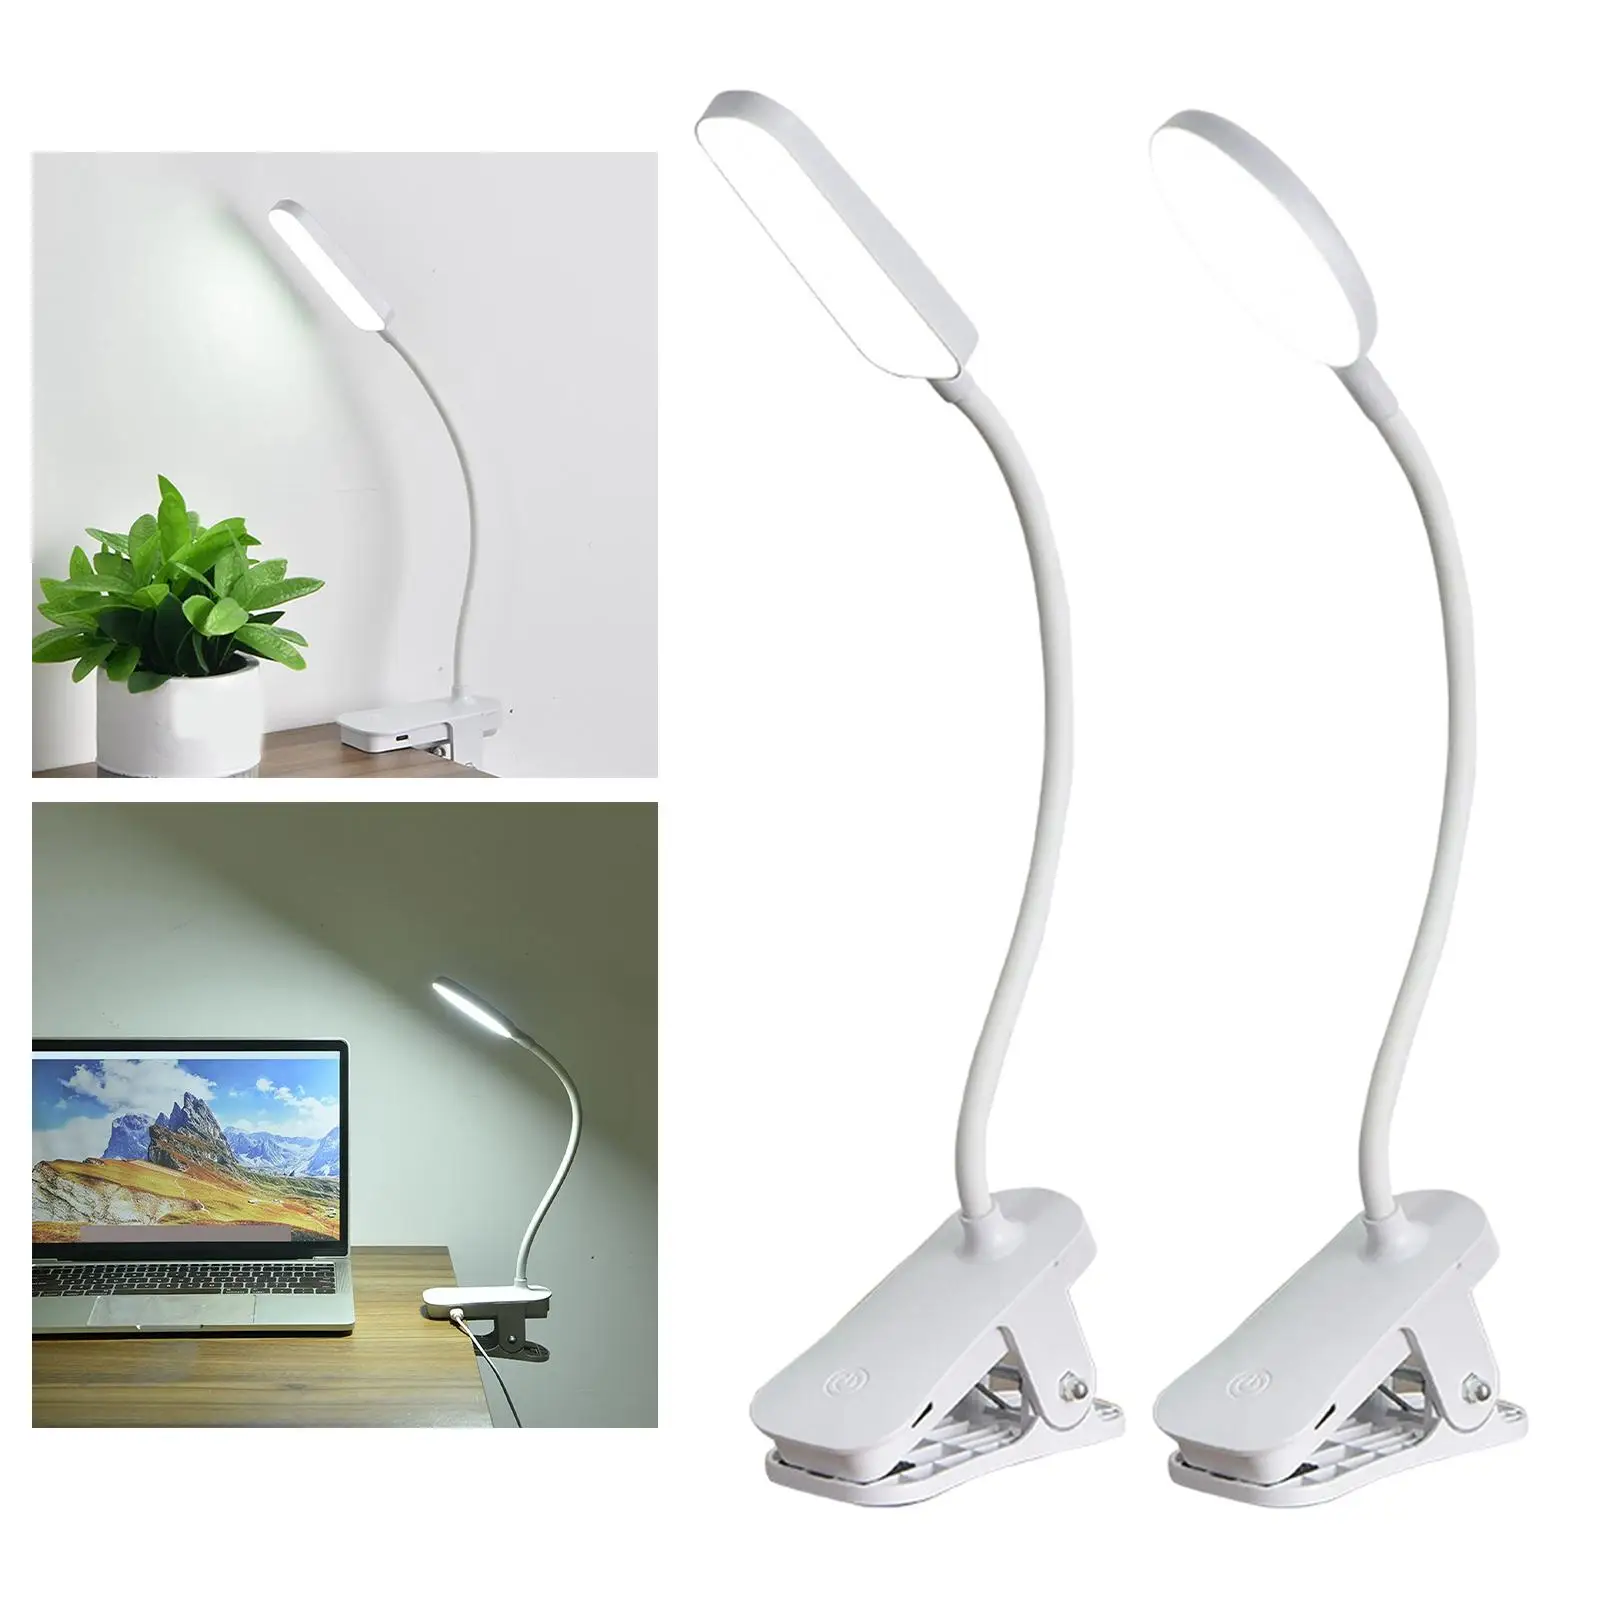 Flexible Arm LED Clip On Table Light Rechargeable Book Lights Eye Caring Table Clamp Lamp Nightlight for Bedside Piano Study